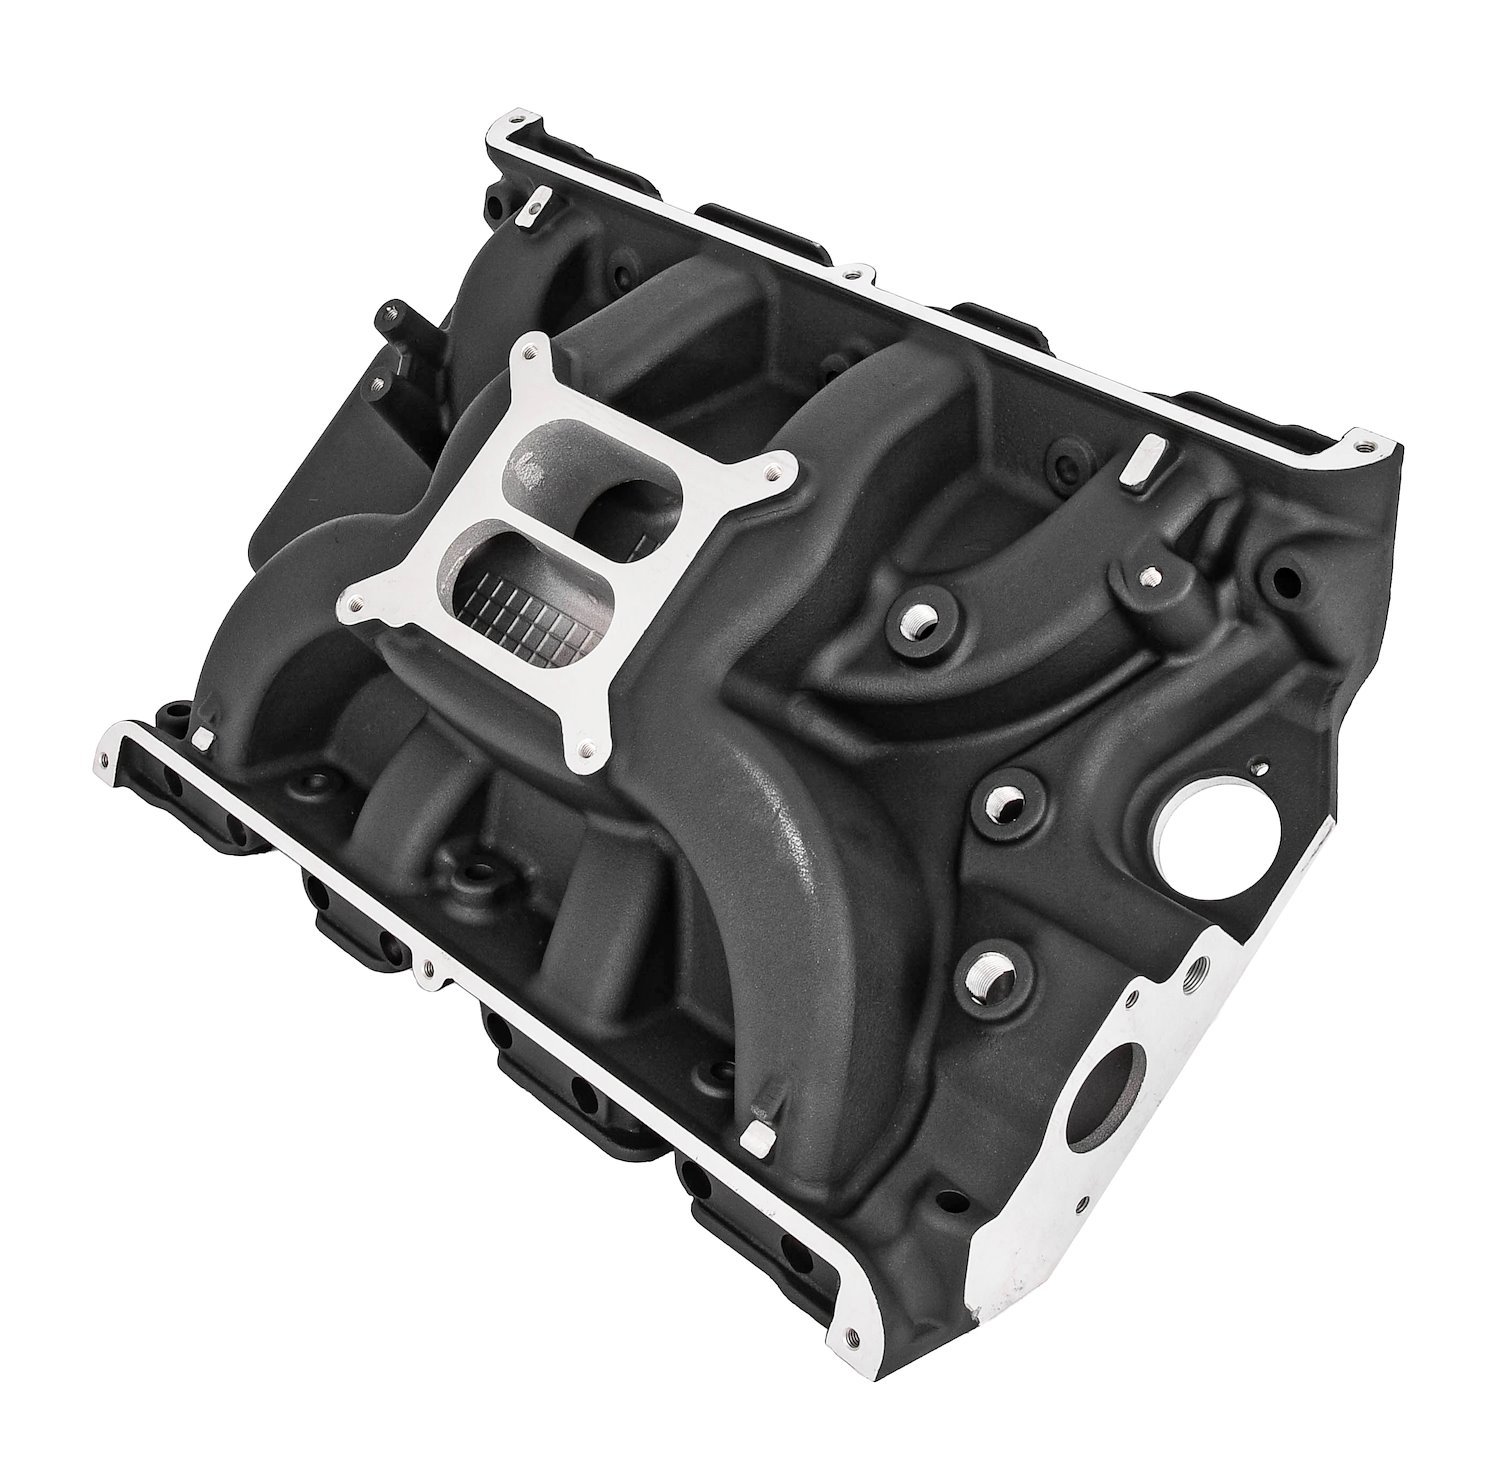 Intake Manifold for Ford 332-428 FE Series Engines, Dual Plane [Black]